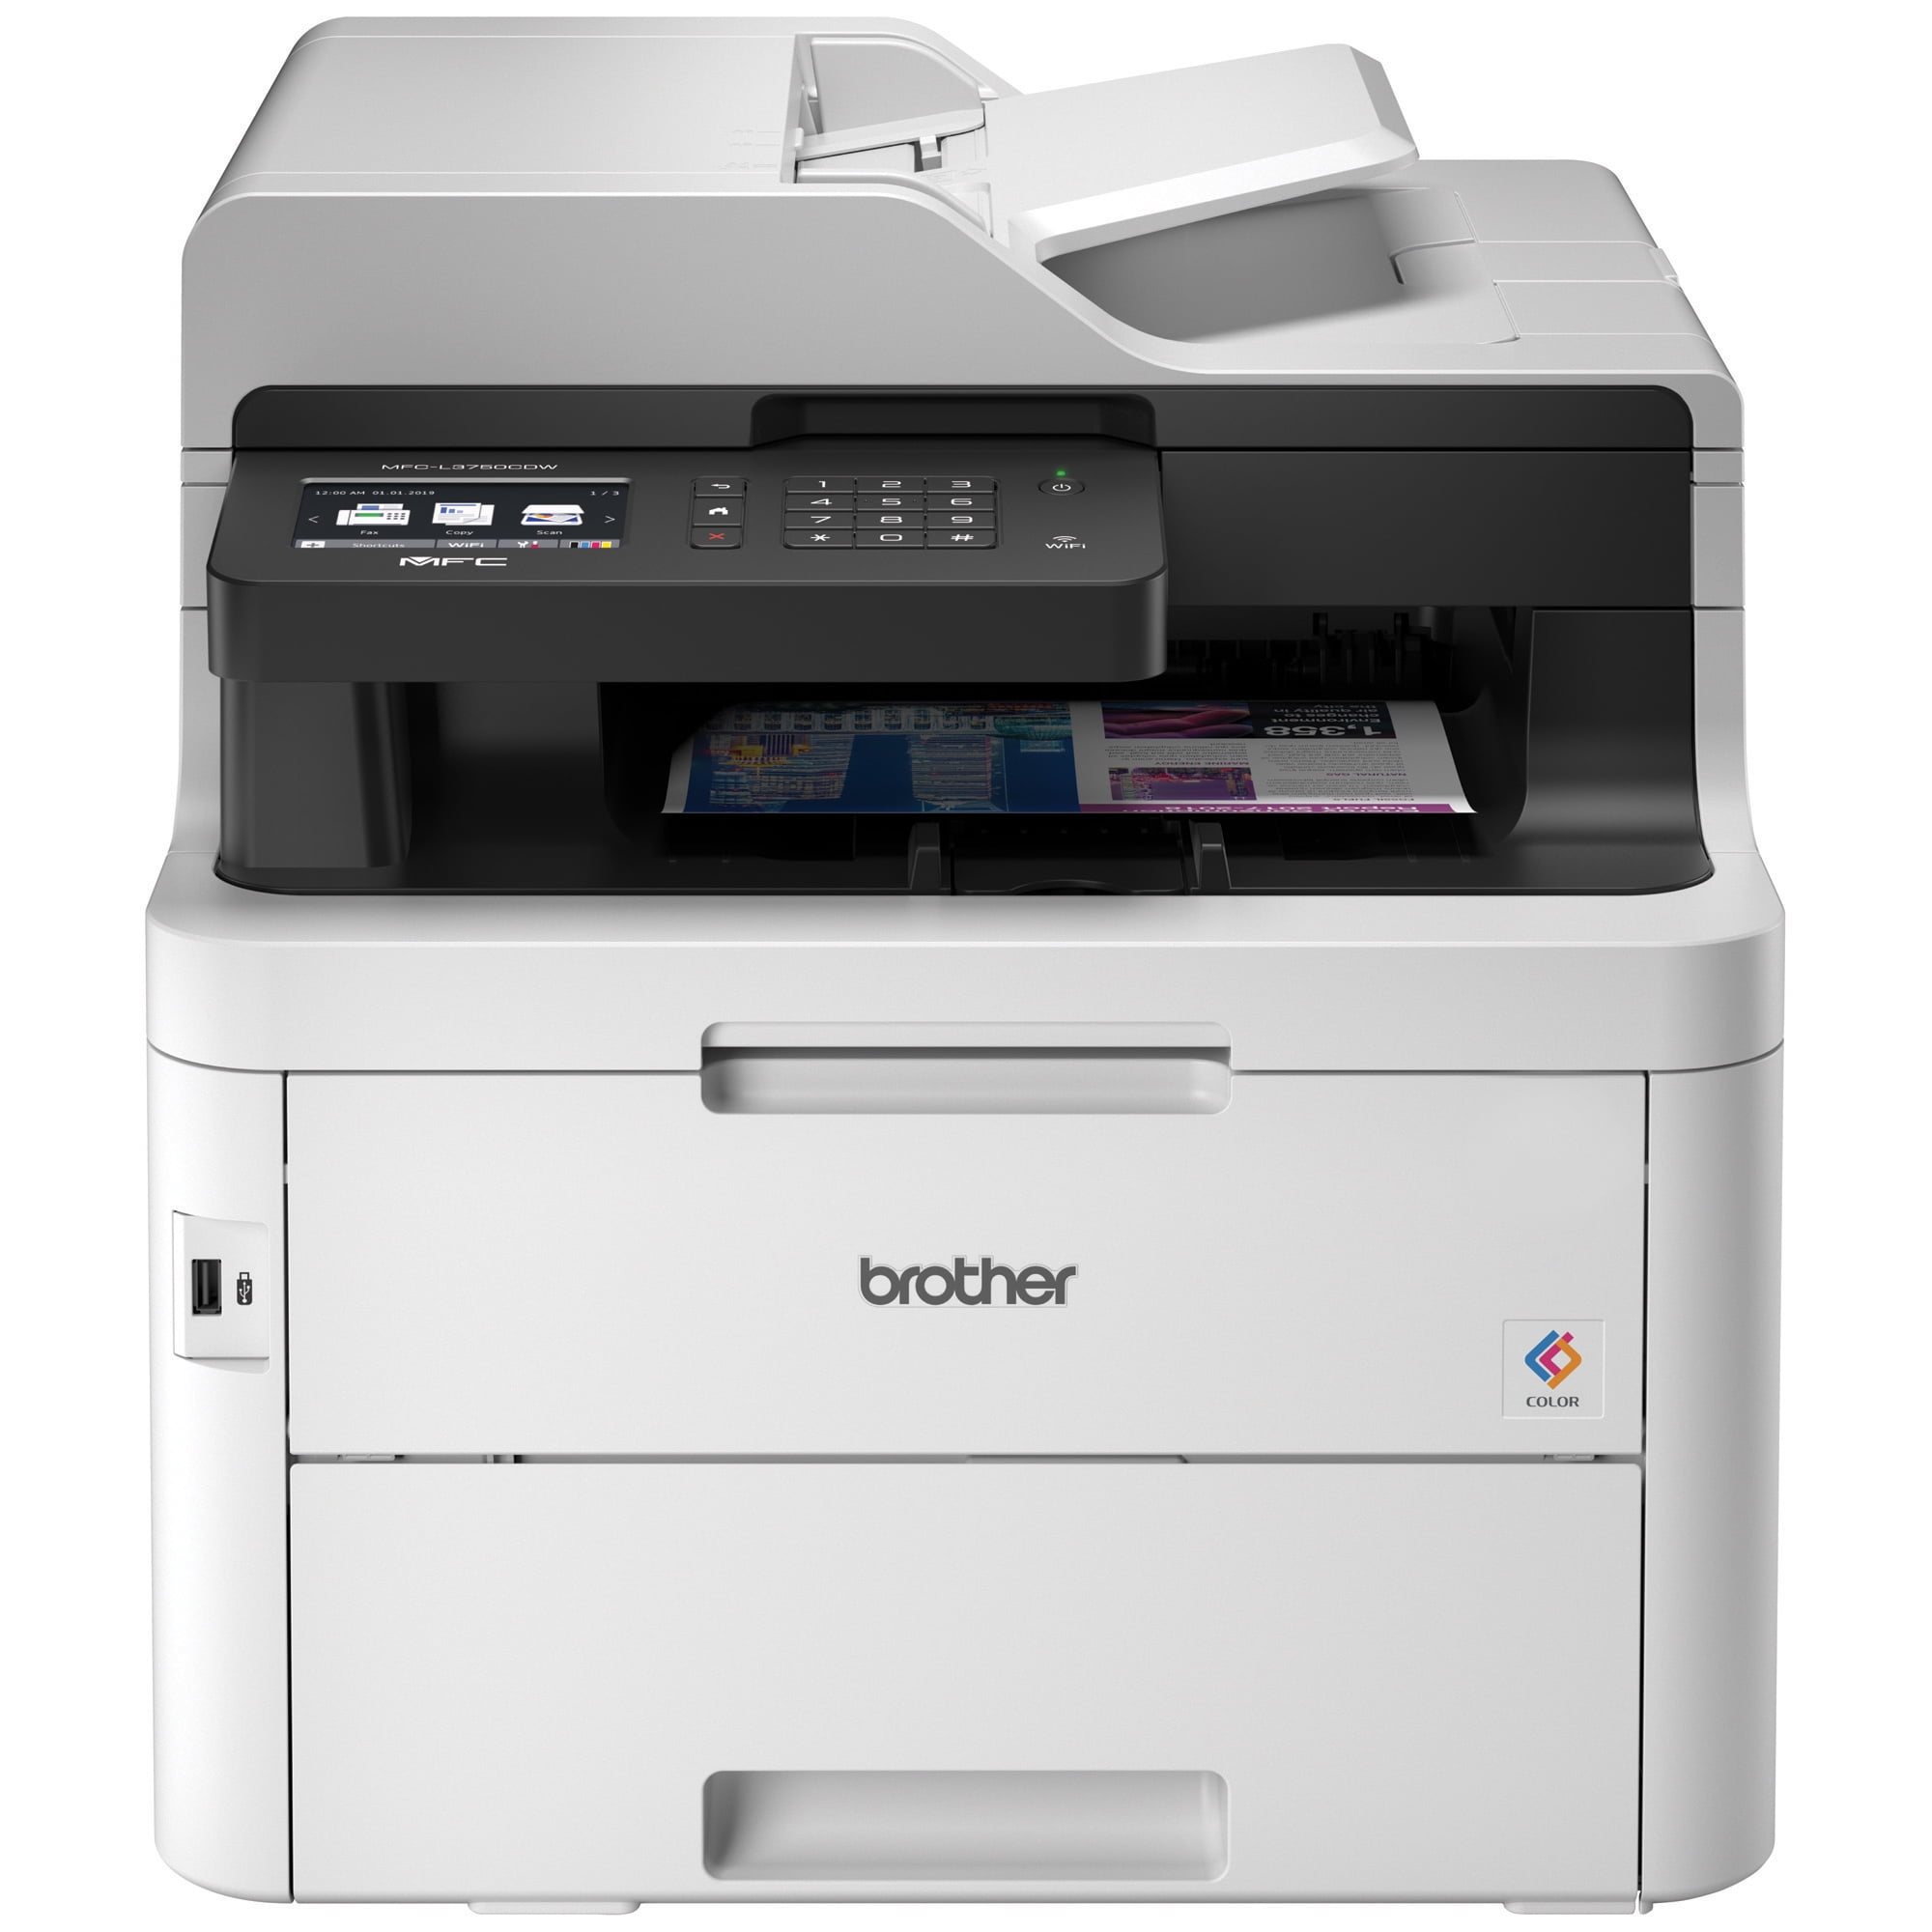 Brother MFC-L3750CDW Compact Digital Color All In One Printer